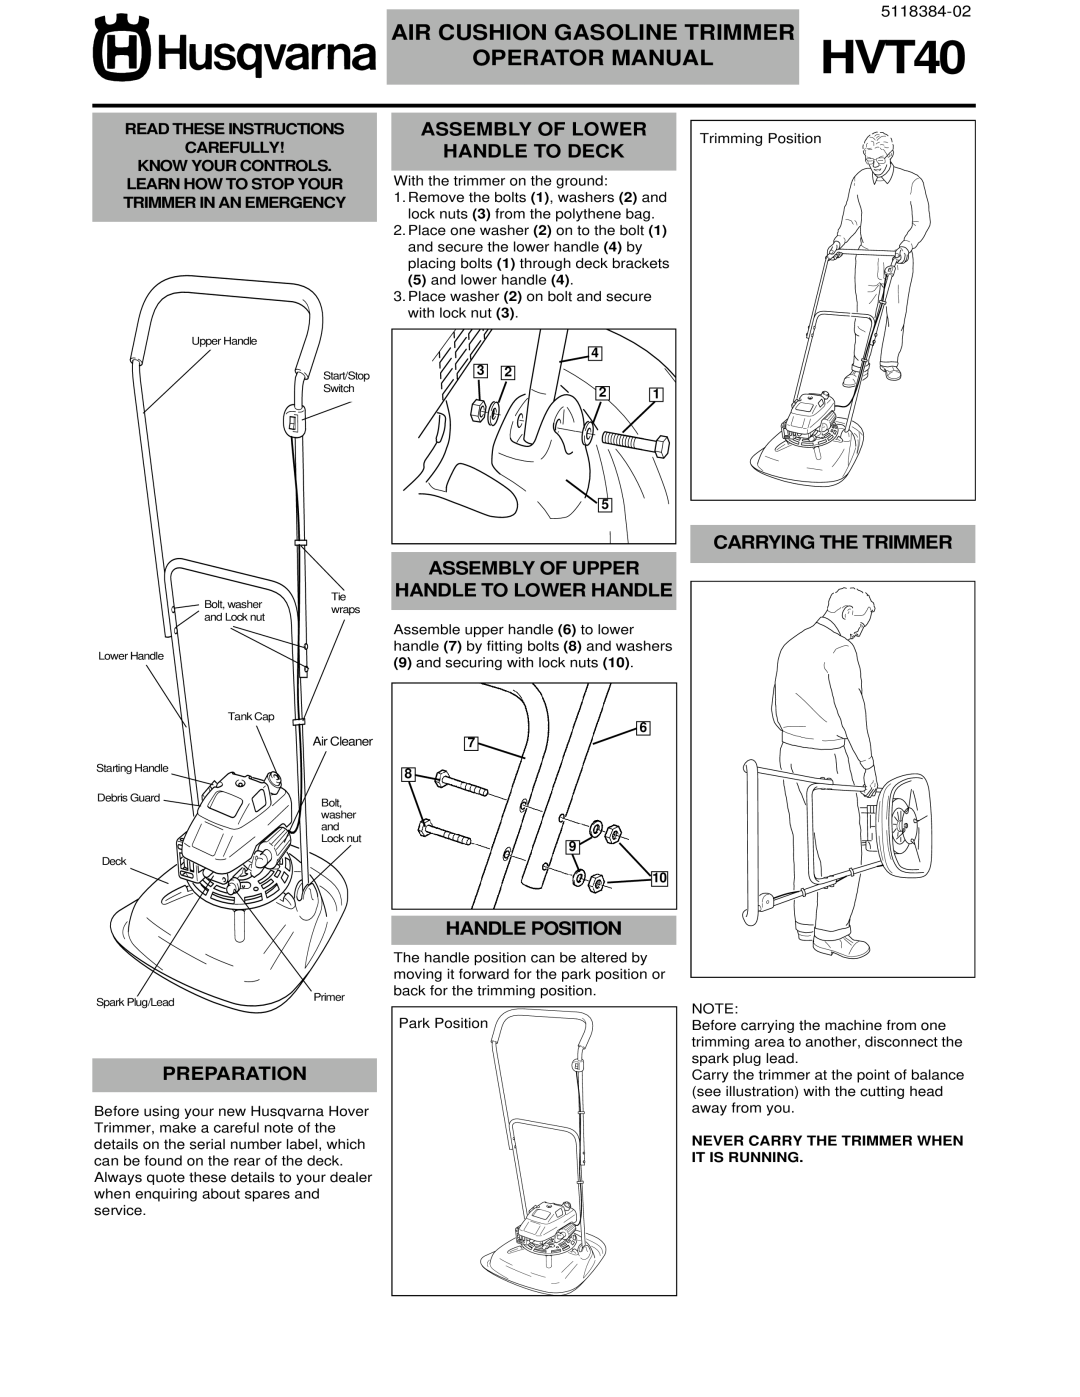 Husqvarna HVT40 manual Assembly Of Lower Handle To Deck, Assembly Of Upper Handle To Lower Handle, Carrying The Trimmer 